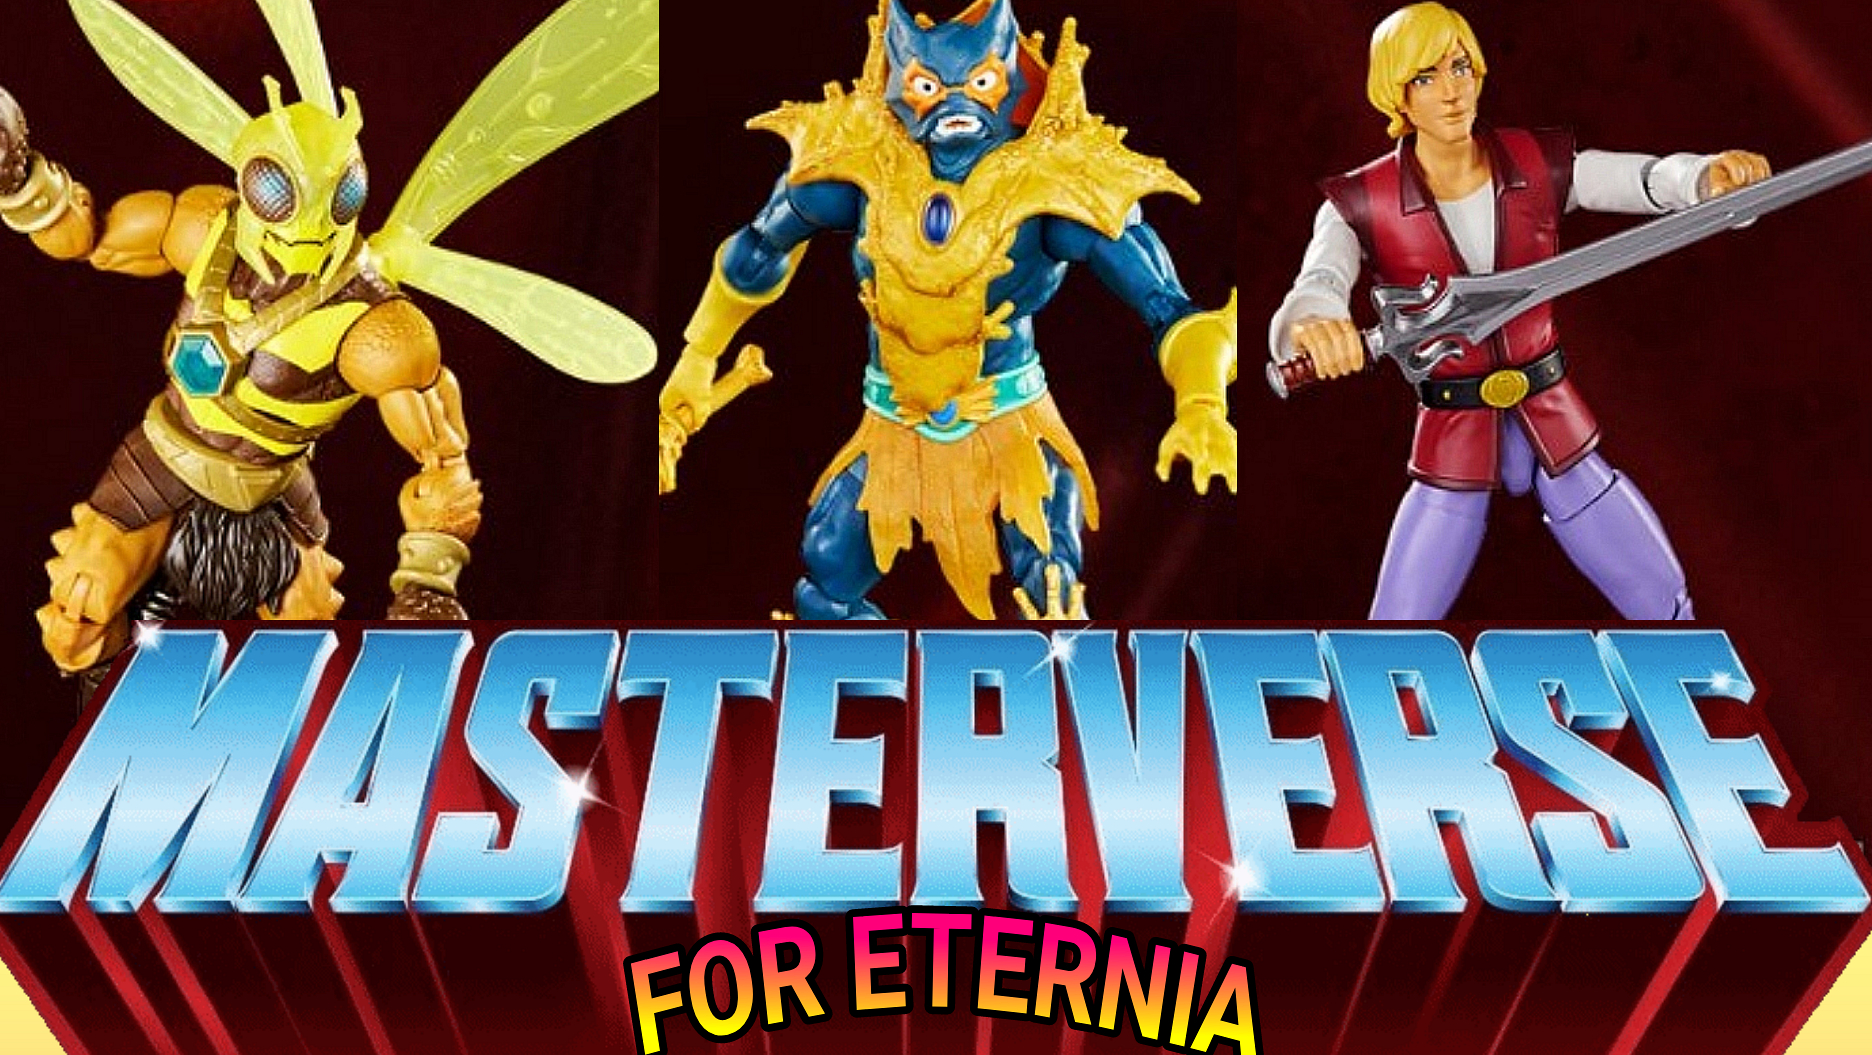 New Images of 13 upcoming Masterverse figures are revealed by Mattel! (Origins too!)